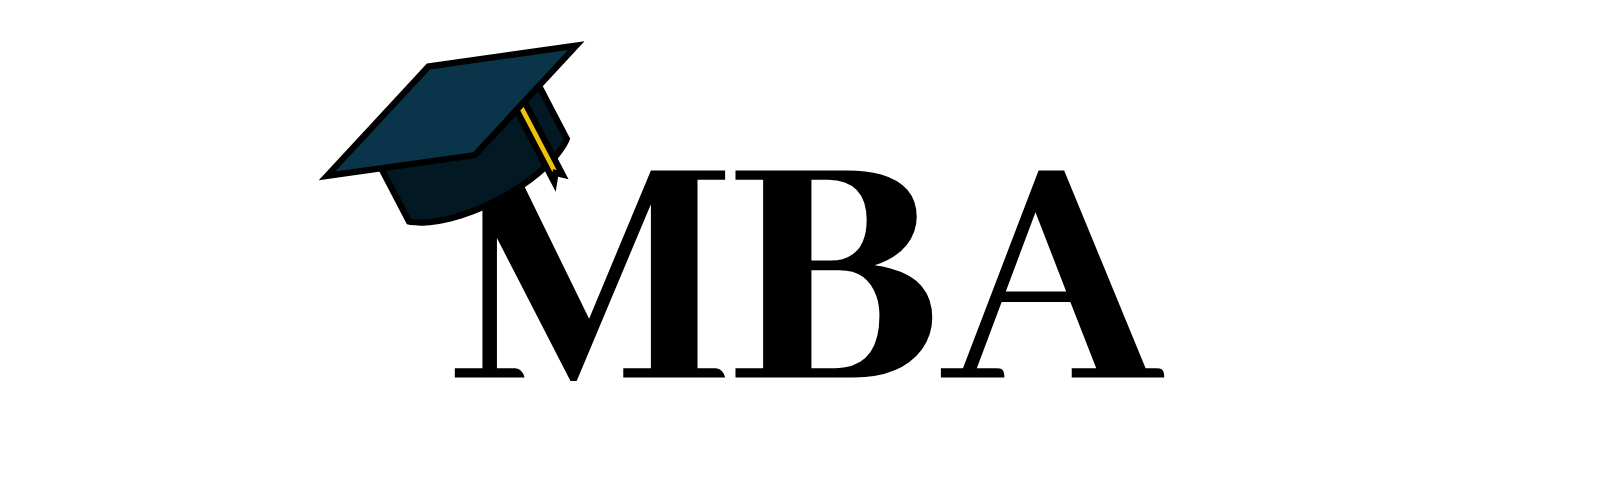 The word MBA on a white background, emphasizing WHY MANY MBAS SWEAR BY THEIR DEGREES